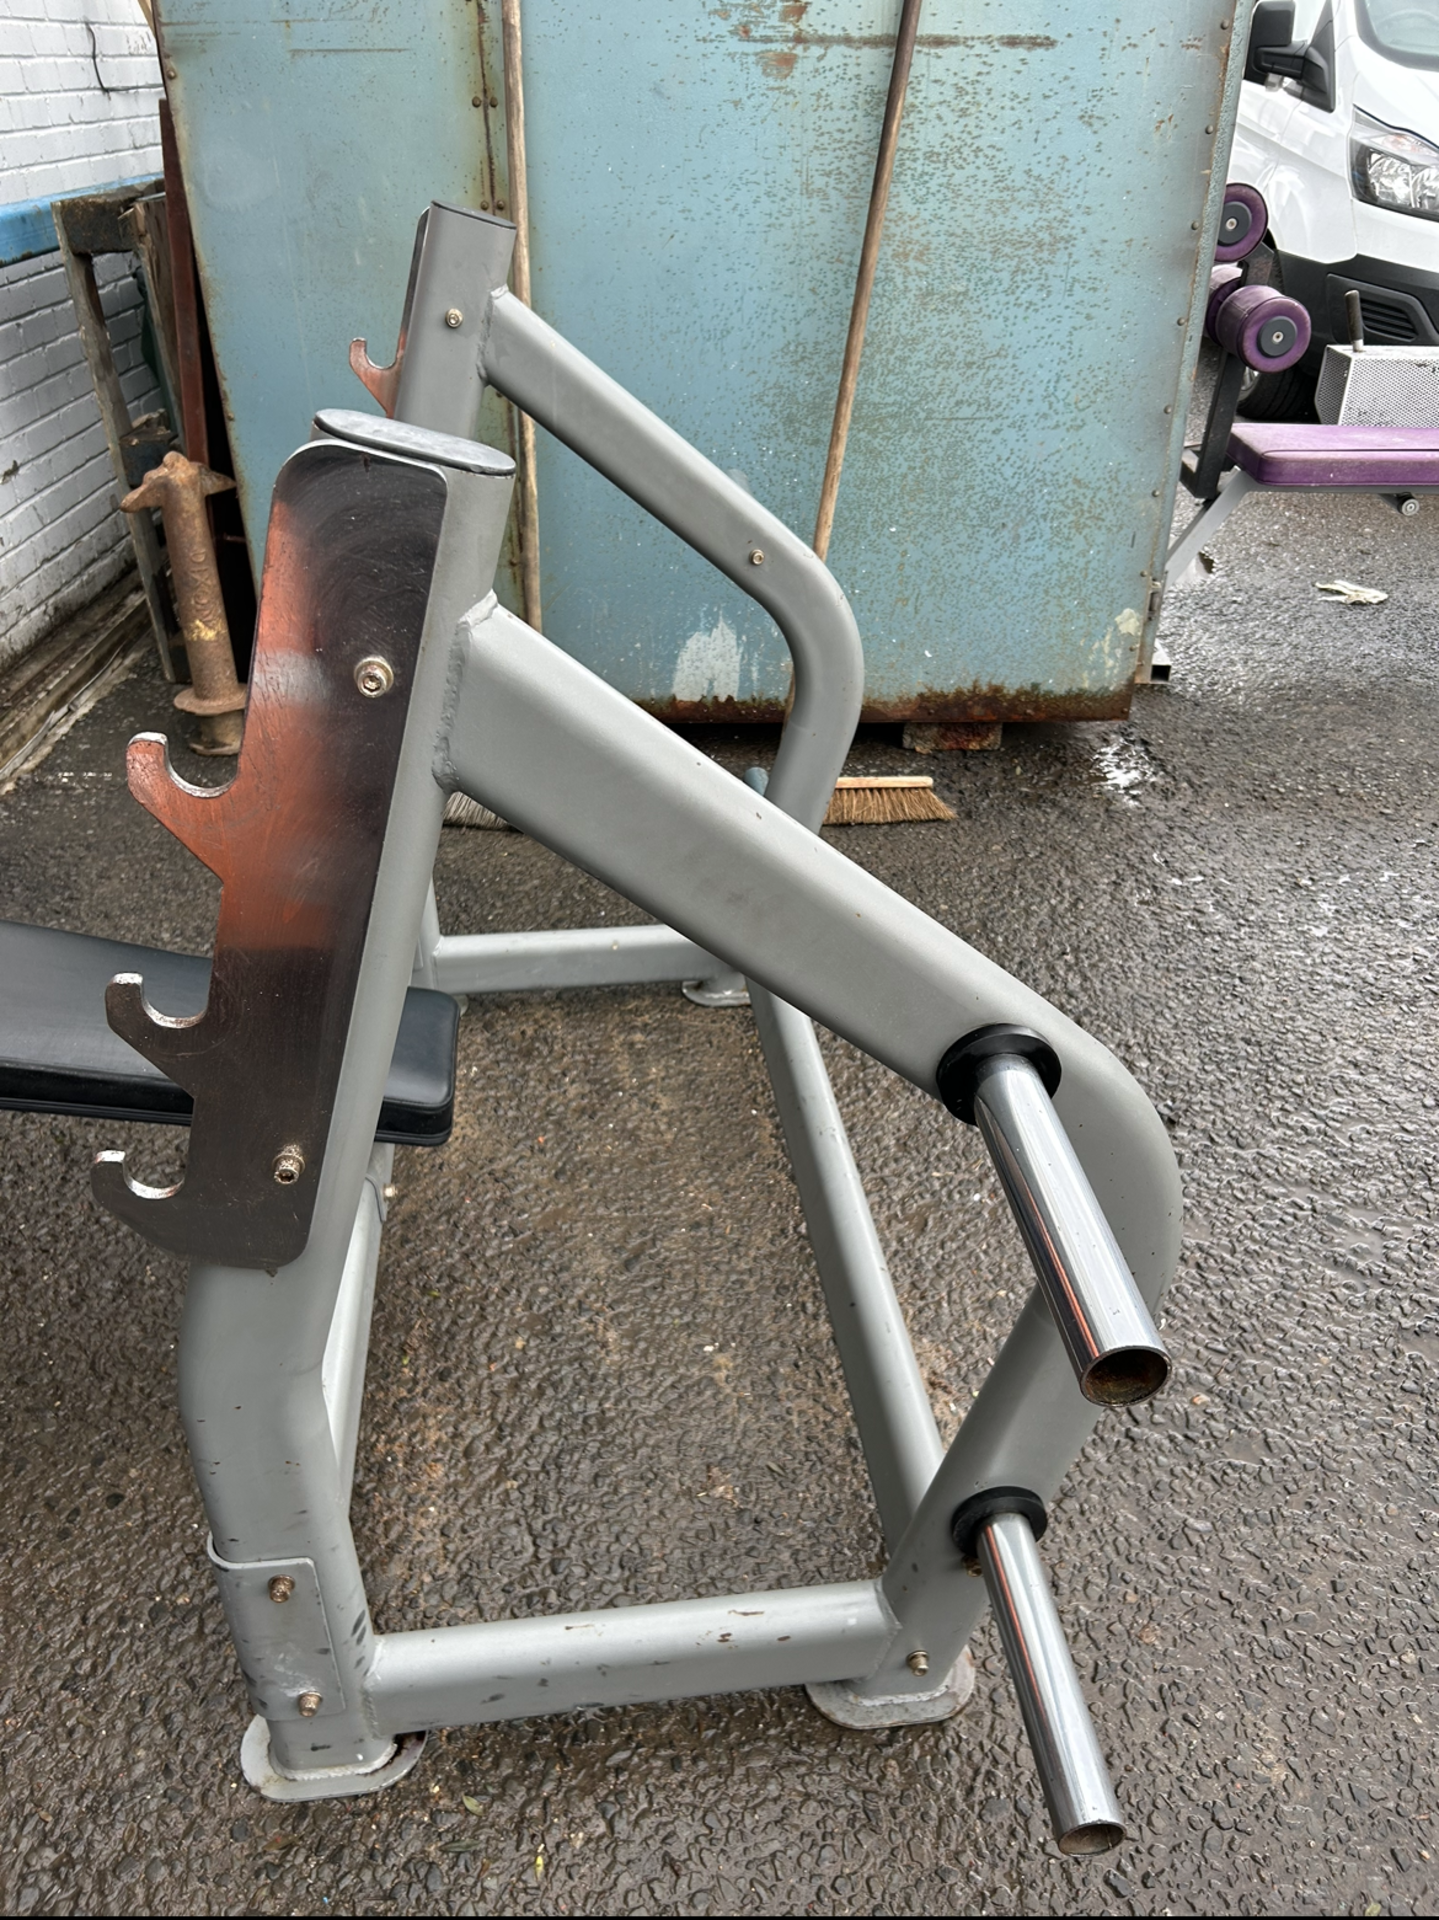 Commercial Olympic decline weight bench press unit. Average condition a few rusty parts shown in the - Image 4 of 4